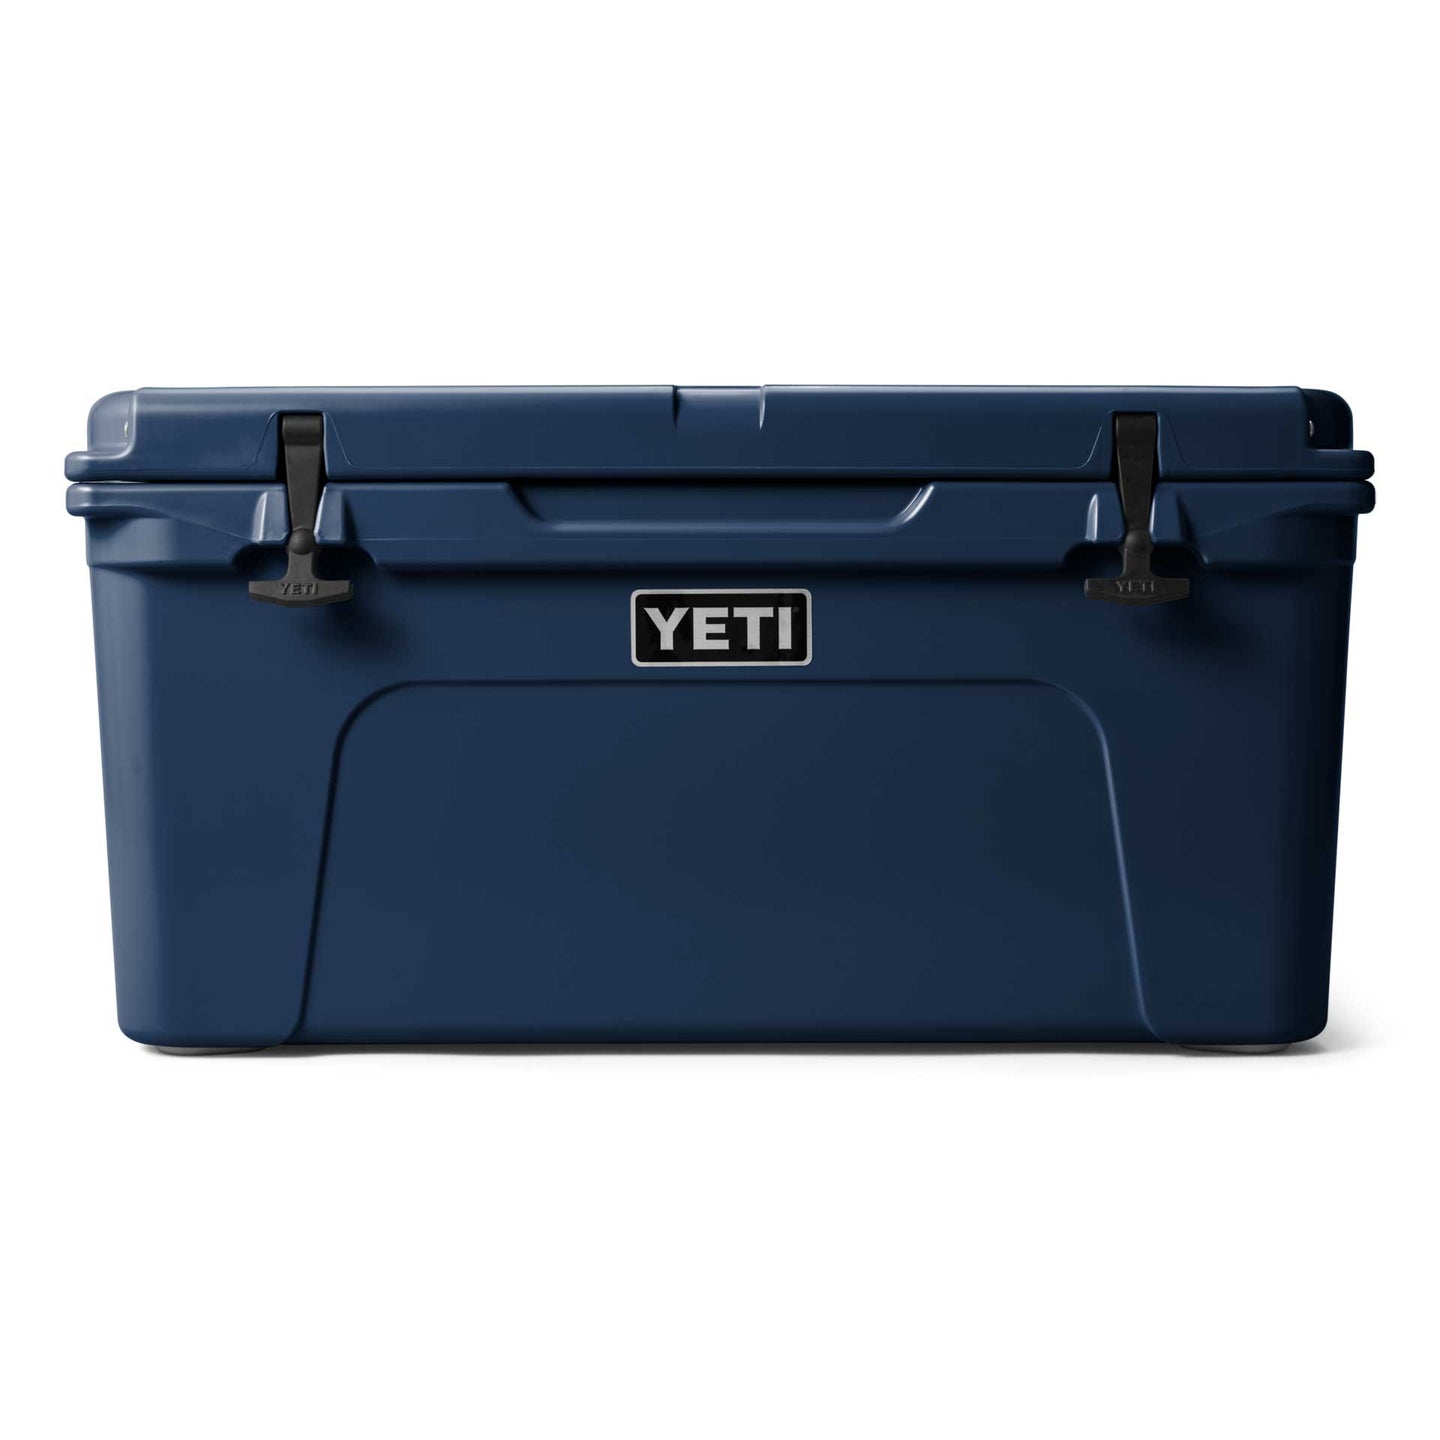 picture of the navy YETI Tundra 65 Cooler